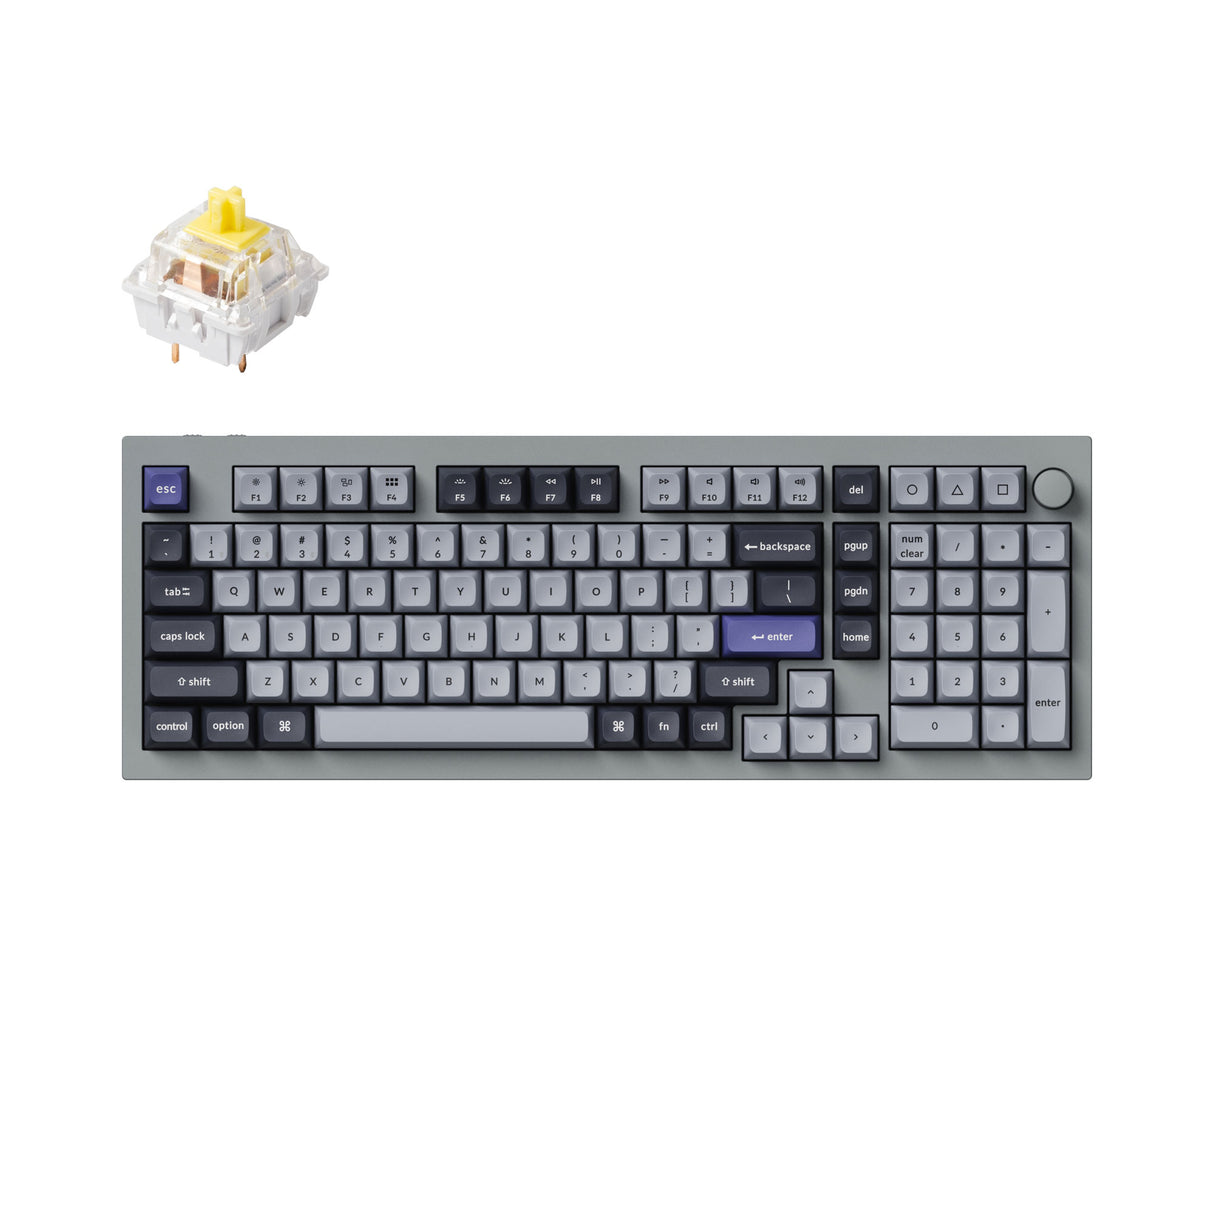 Keychron Q5 Pro QMK/VIA wireless custom mechanical keyboard 96 percent layout full aluminum grey frame for Mac WIndows Linux with RGB backlight and hot-swappable K Pro switch banana